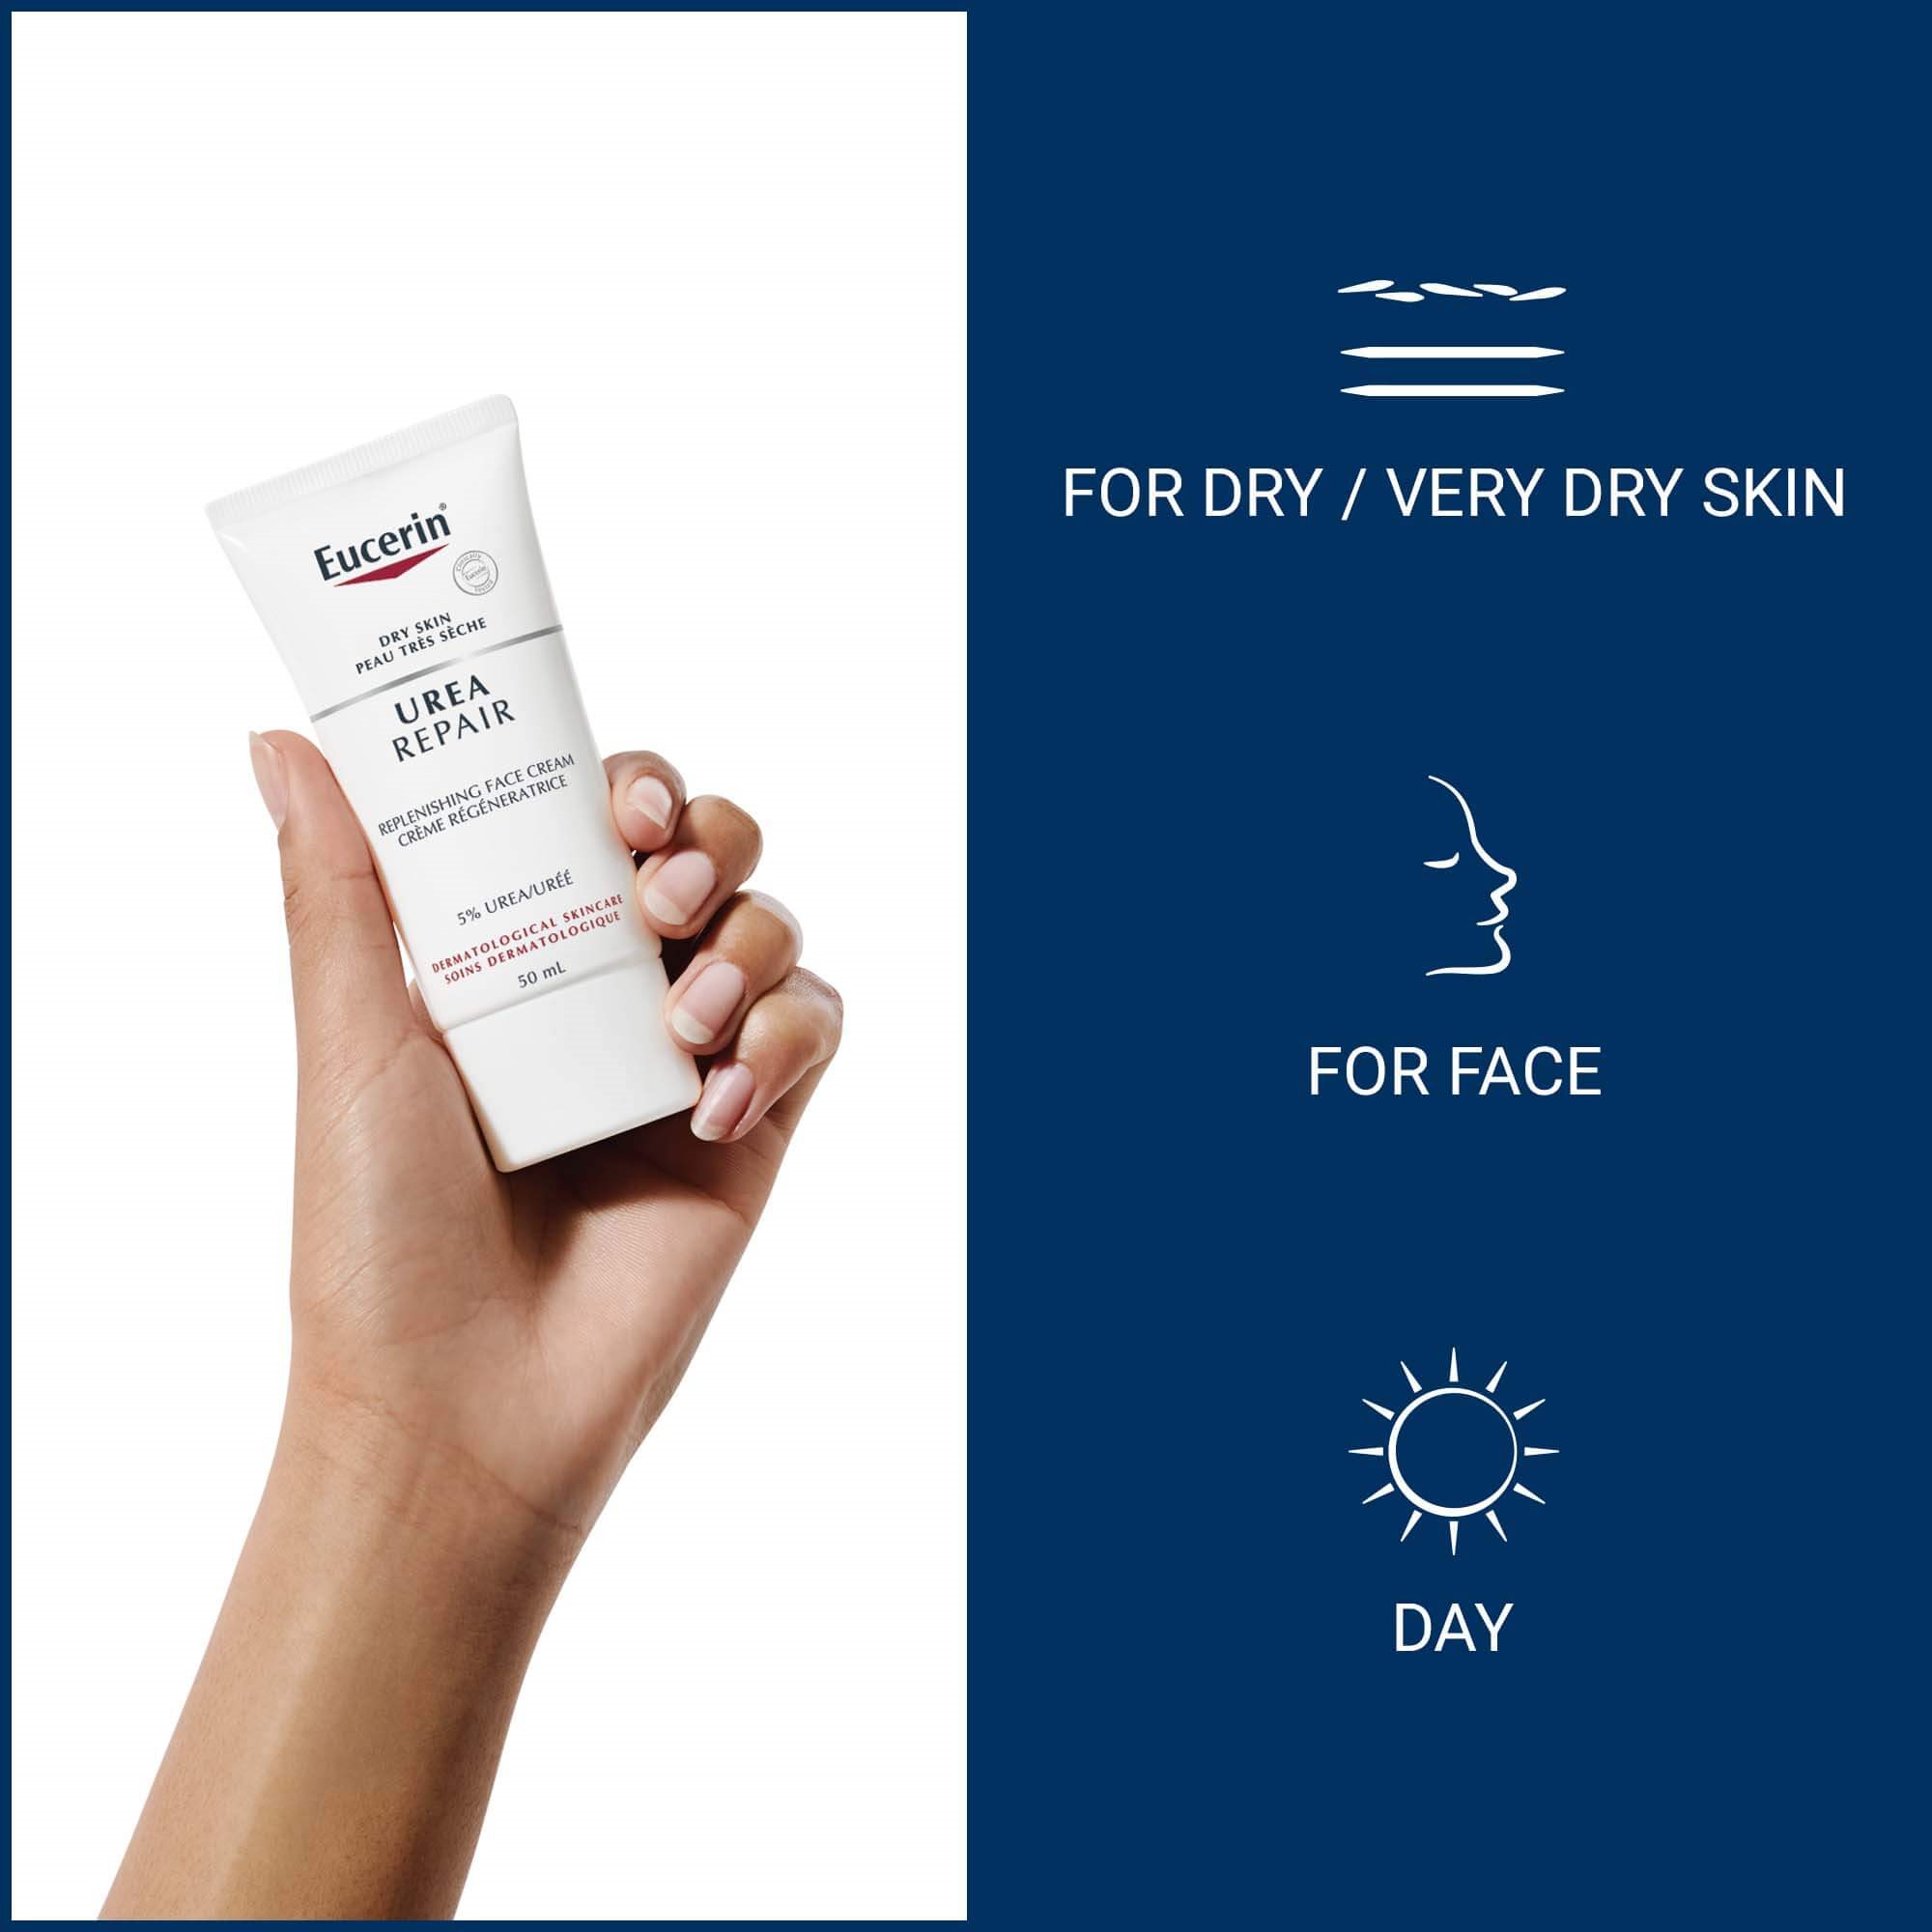 View of model holding Eucerin Urea Repair replenishing face cream with product details text against a blue background.